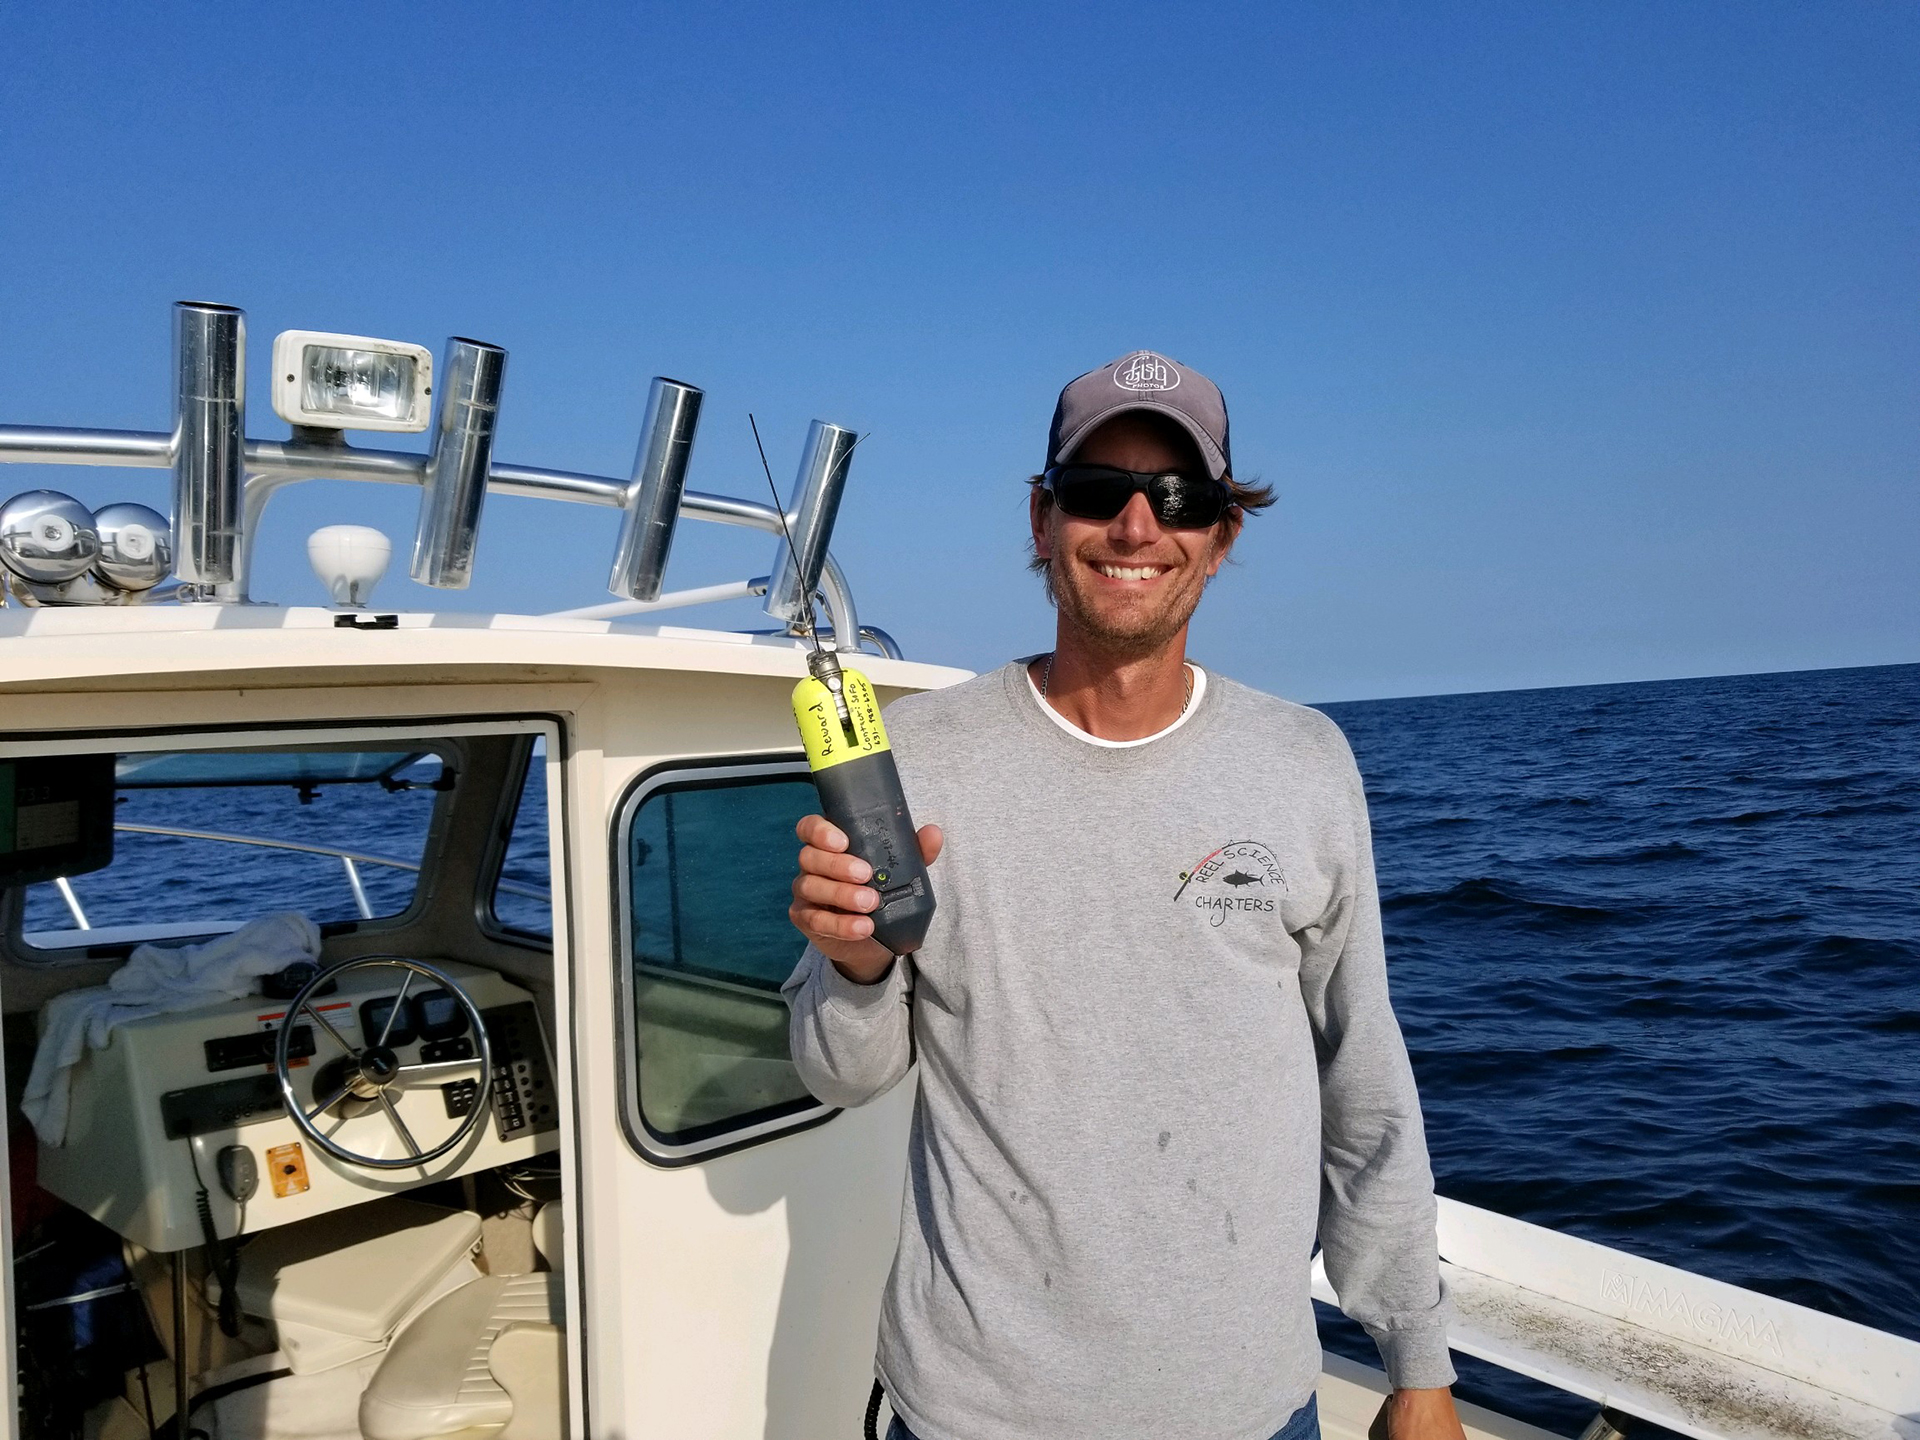 Southampton High School marine biology teacher Greg Metzger proudly displays a CATS-cam tag placed on the first thresher shark he caught after it was retrieved.